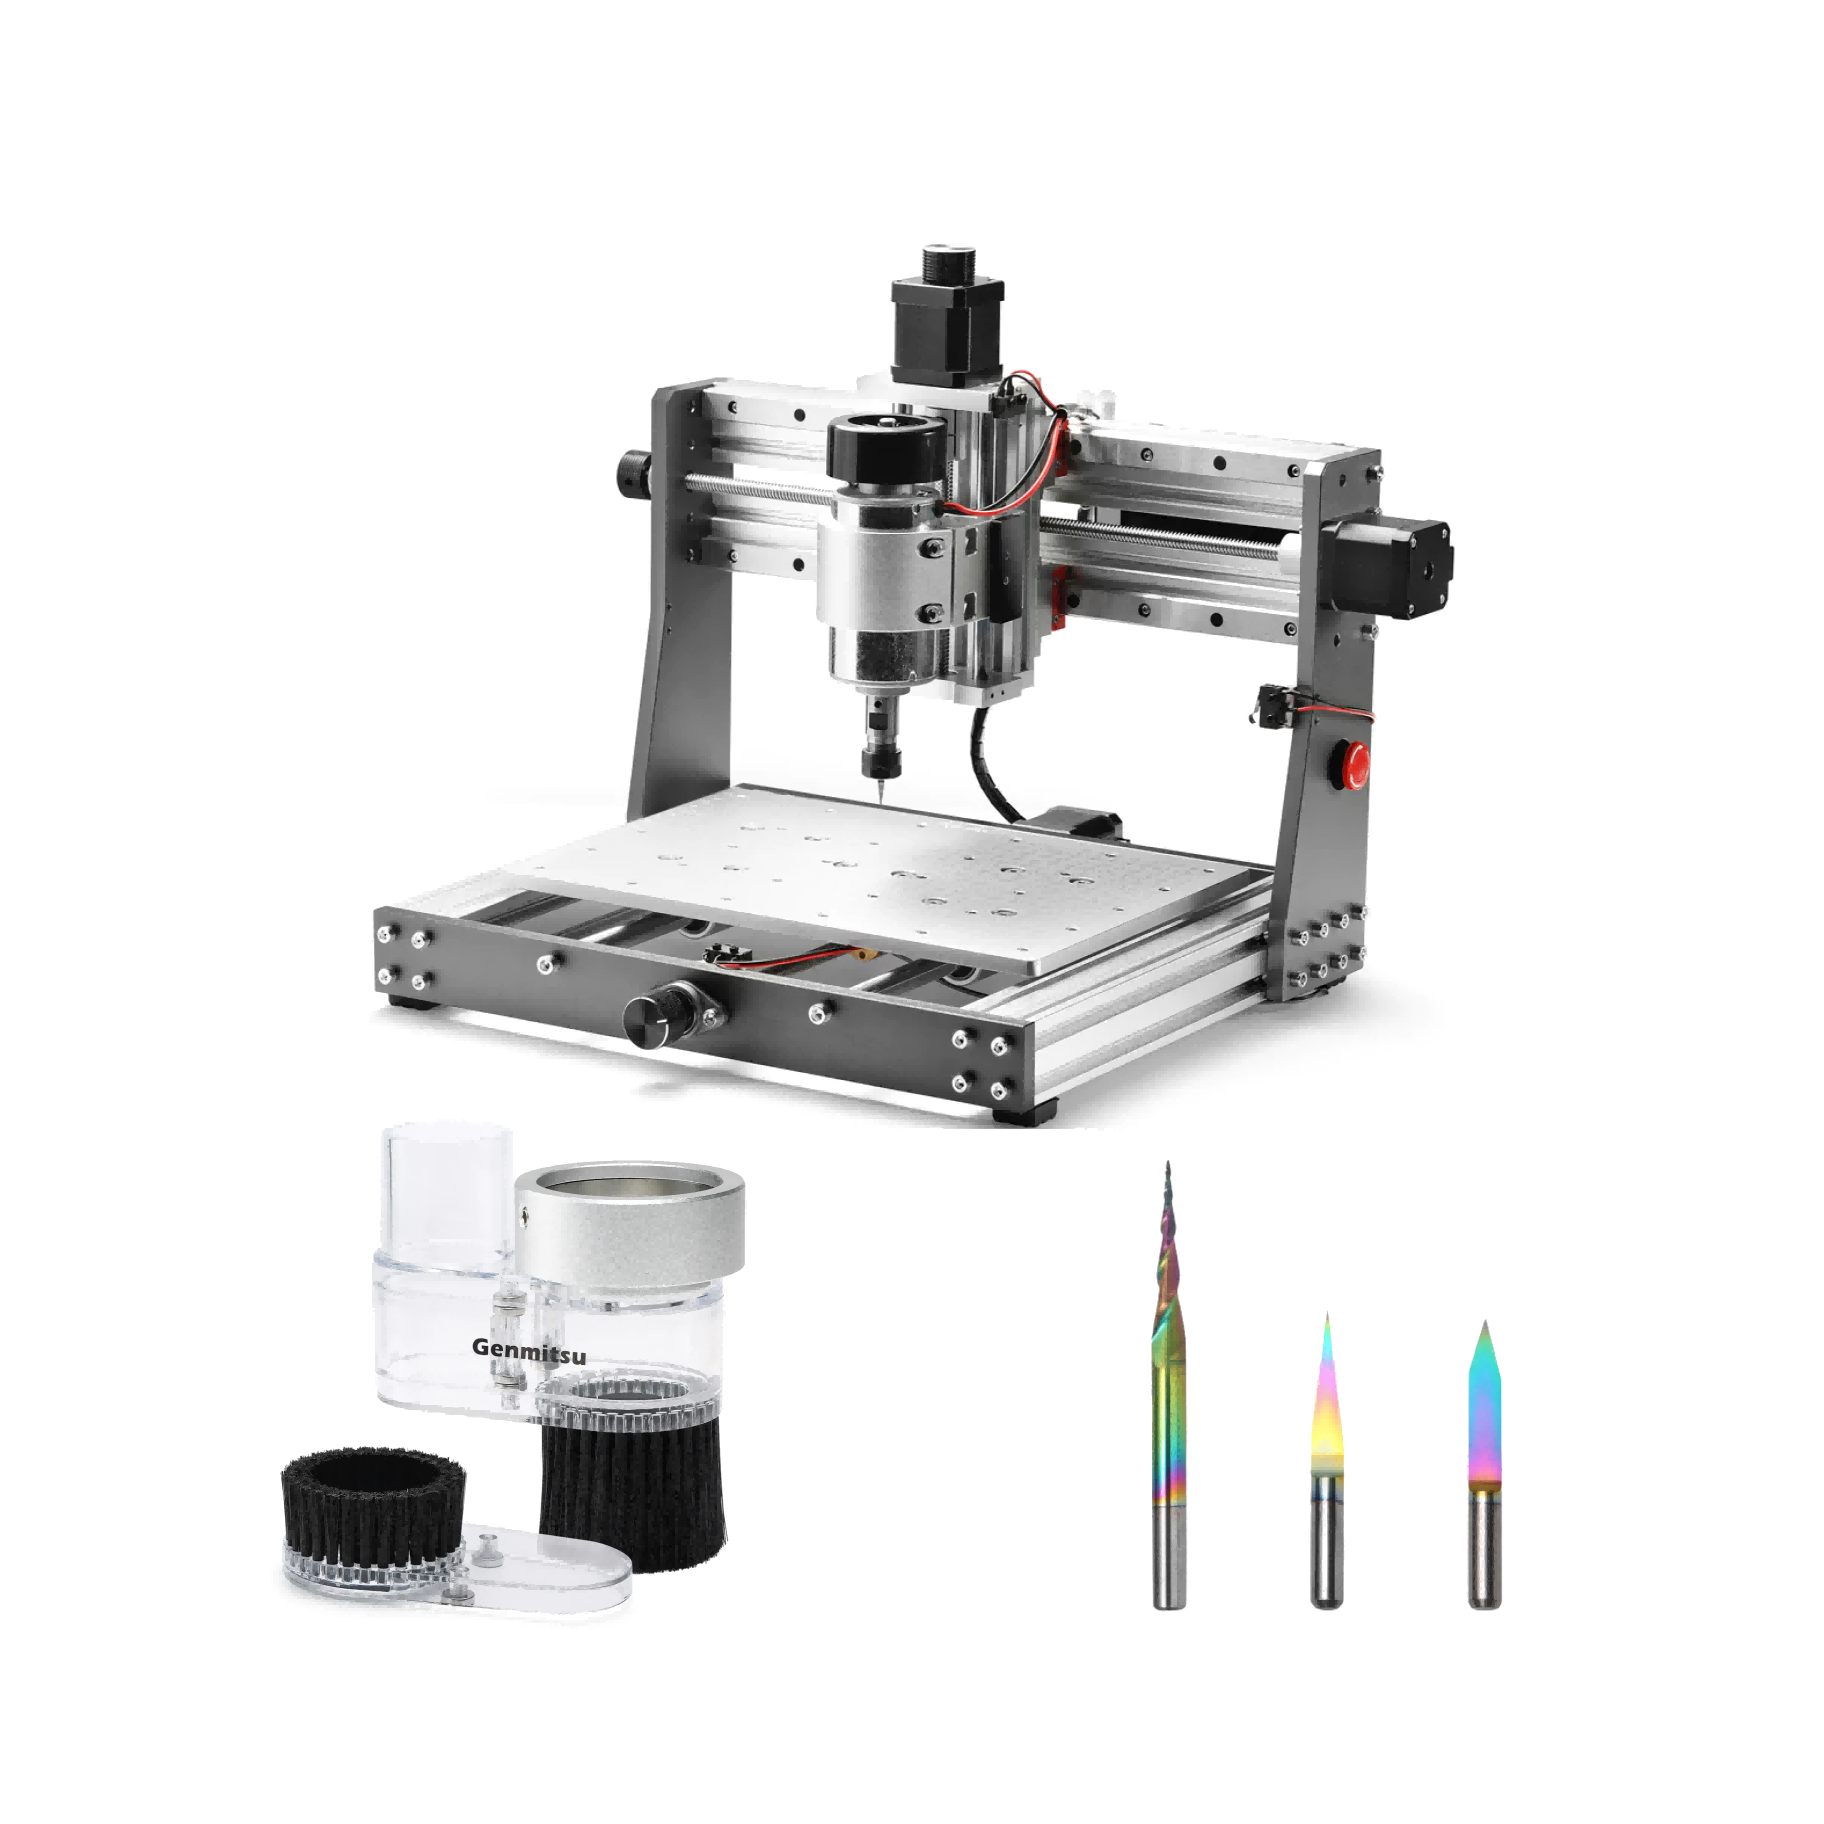 [Discontinued] 3020-PRO MAX CNC Router Machine for Metal Carving and More